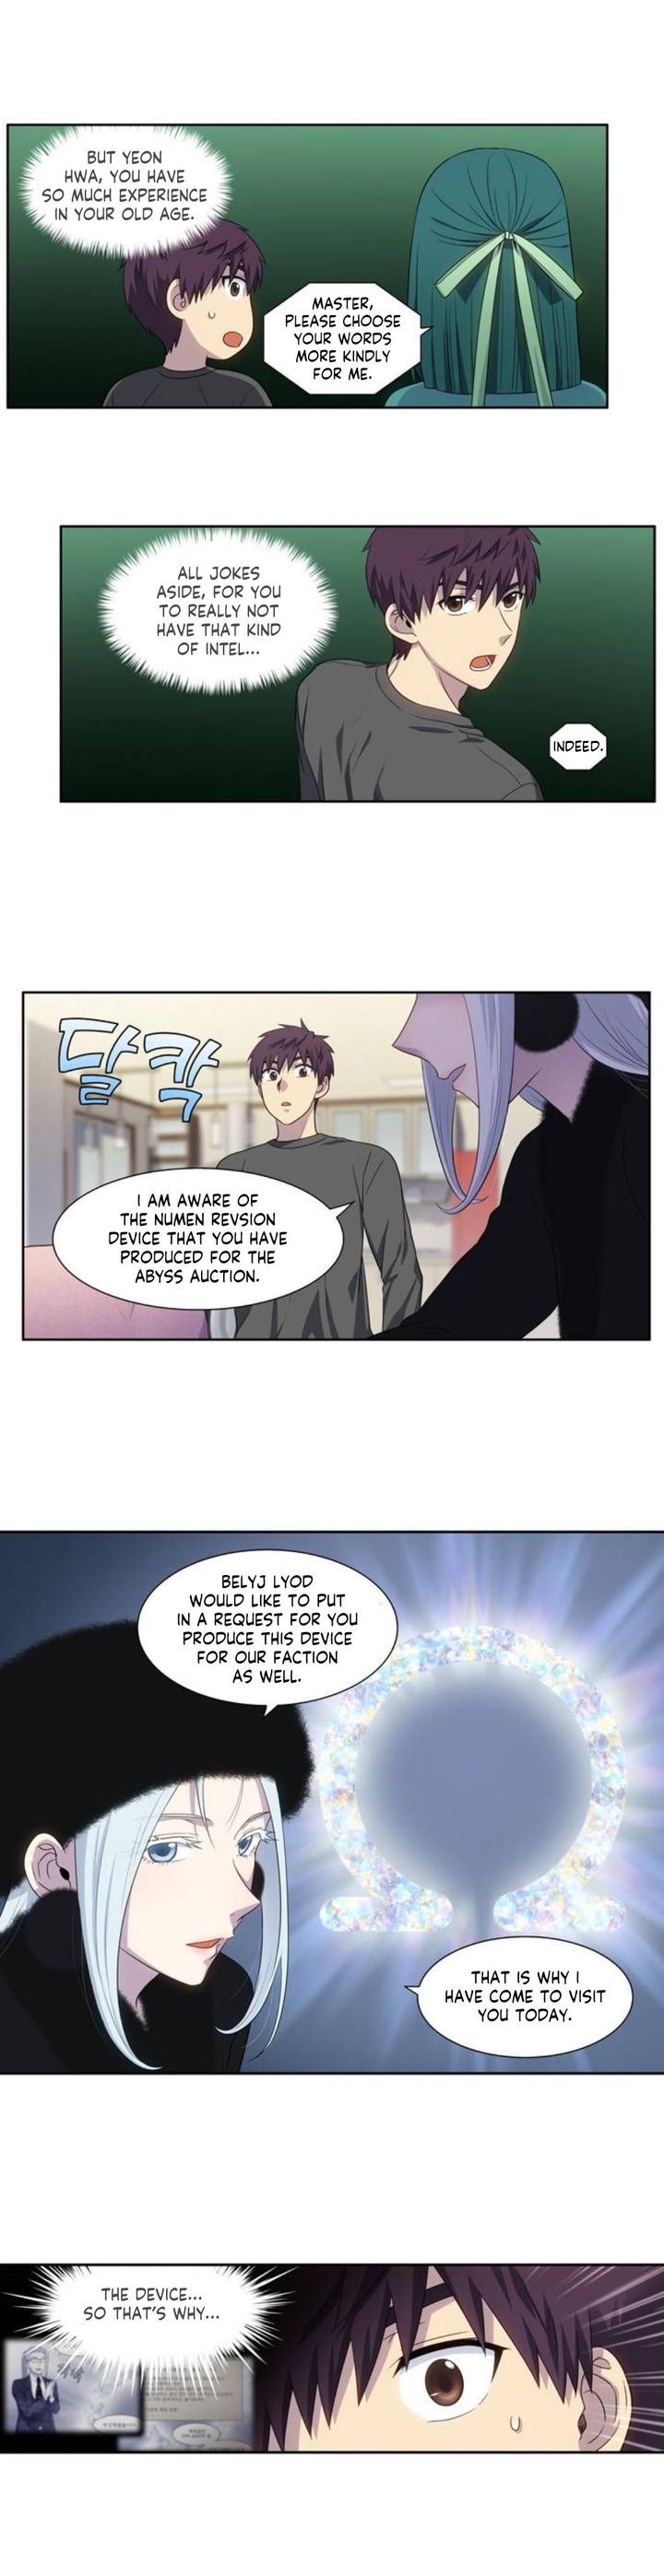 The Gamer Chapter 359 Page 7